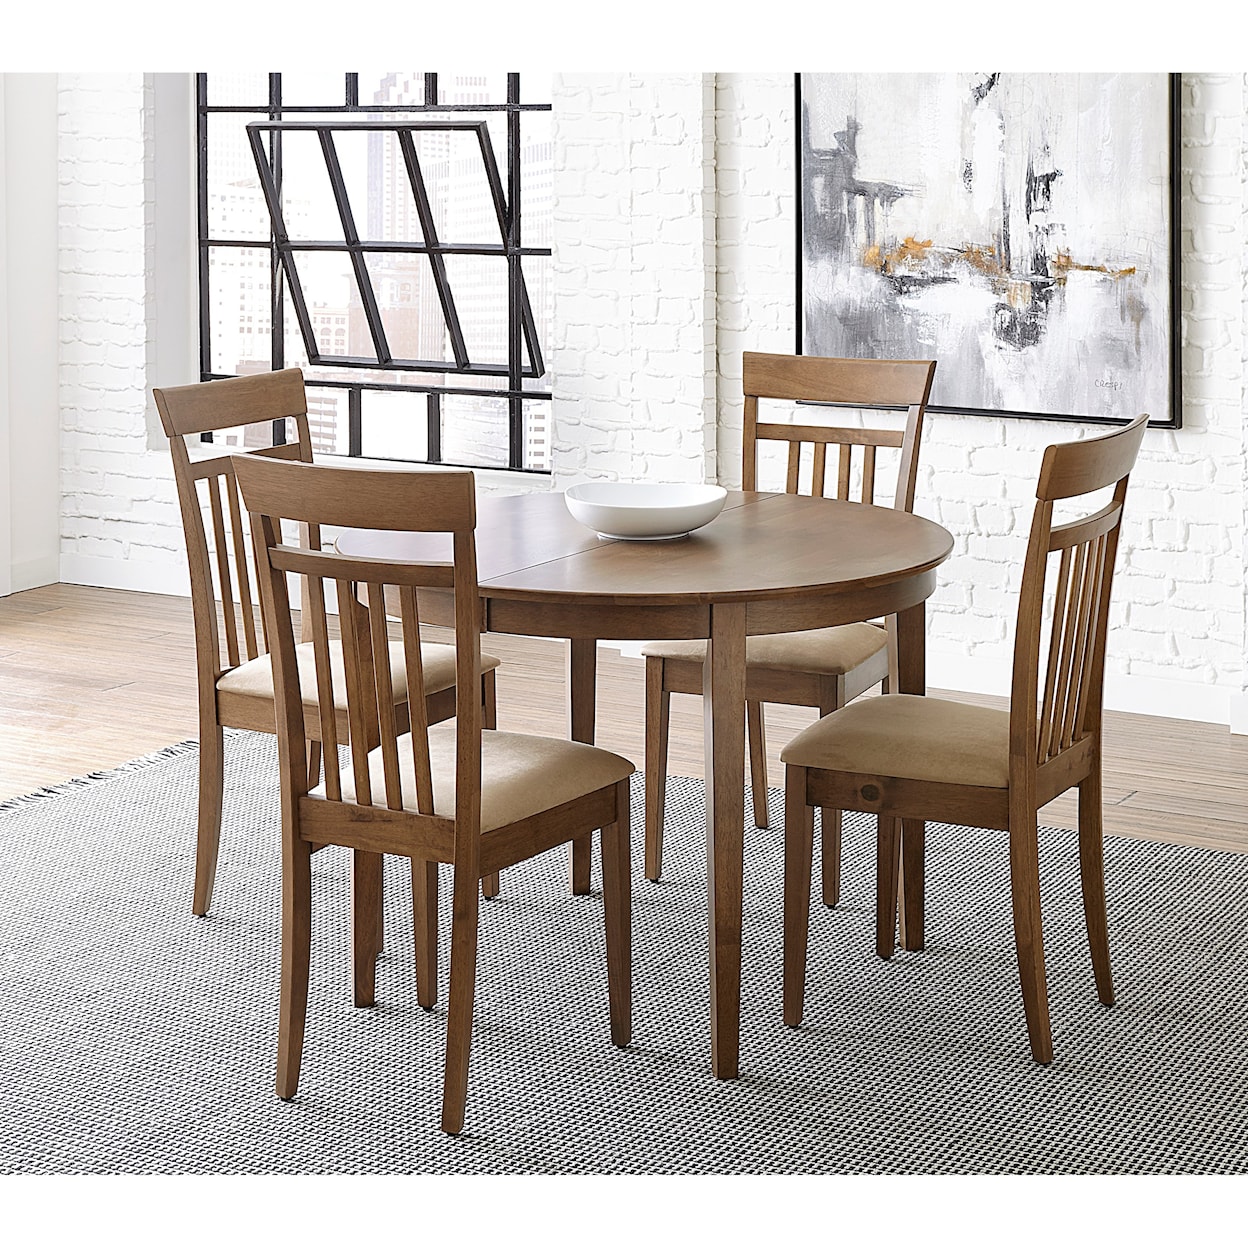 Progressive Furniture Palmer 5-Piece Table and Chair Set